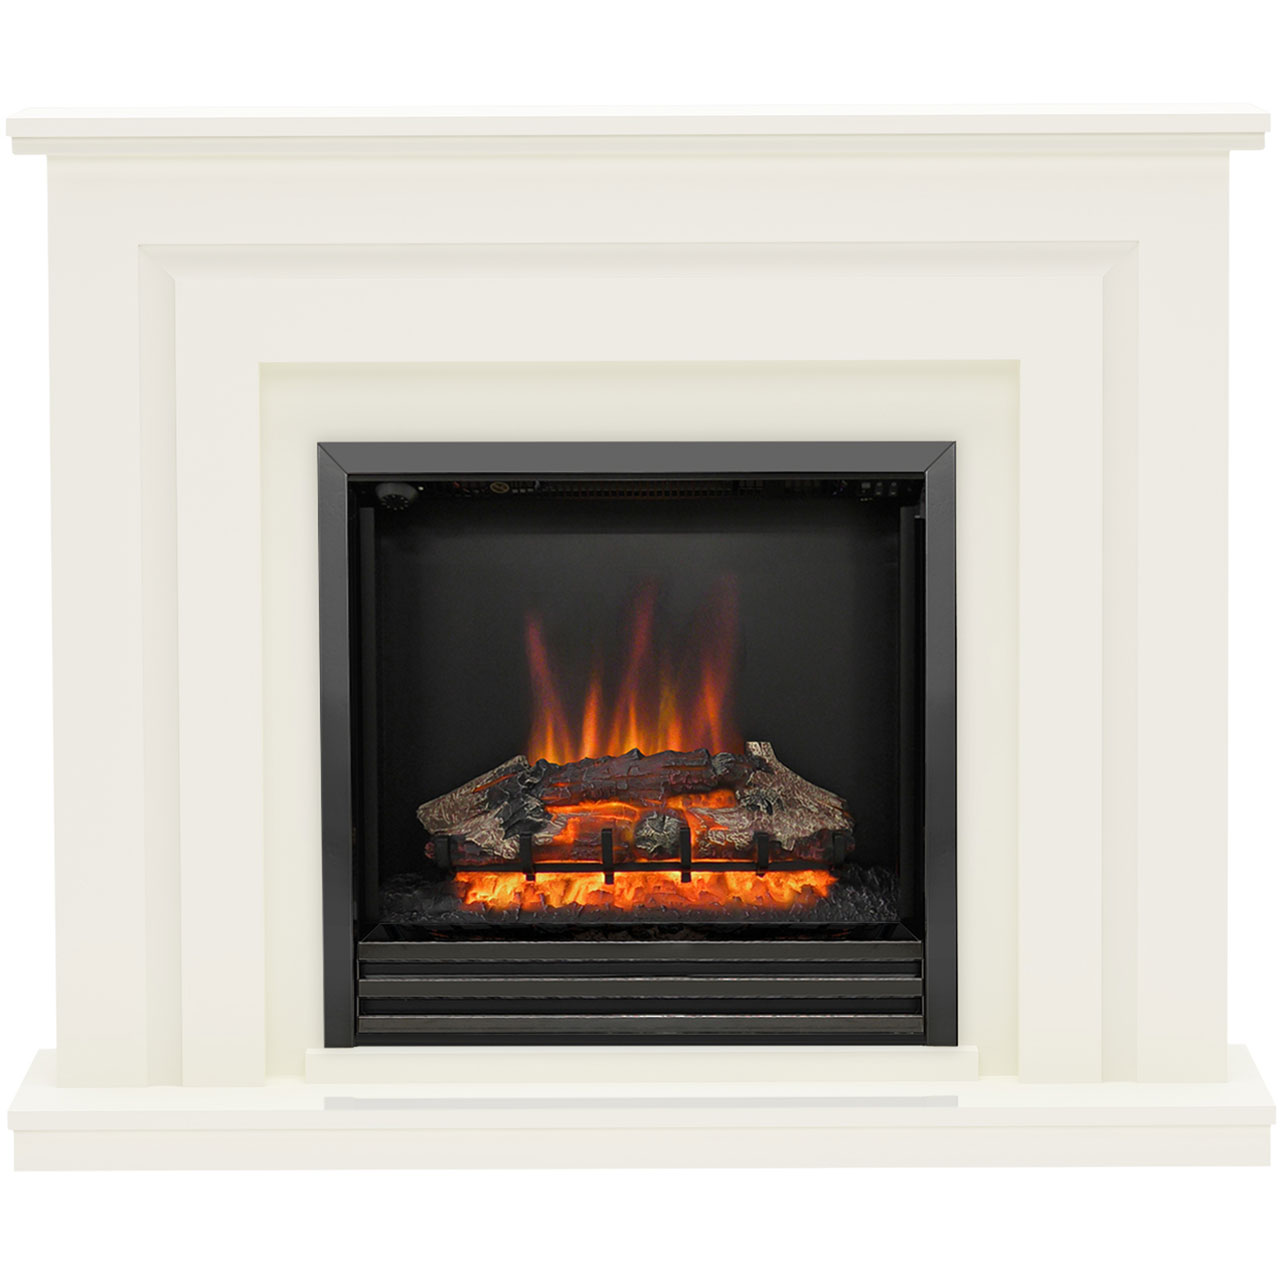 BeModern Whitham 538X Log Effect Suite And Surround Fireplace Review